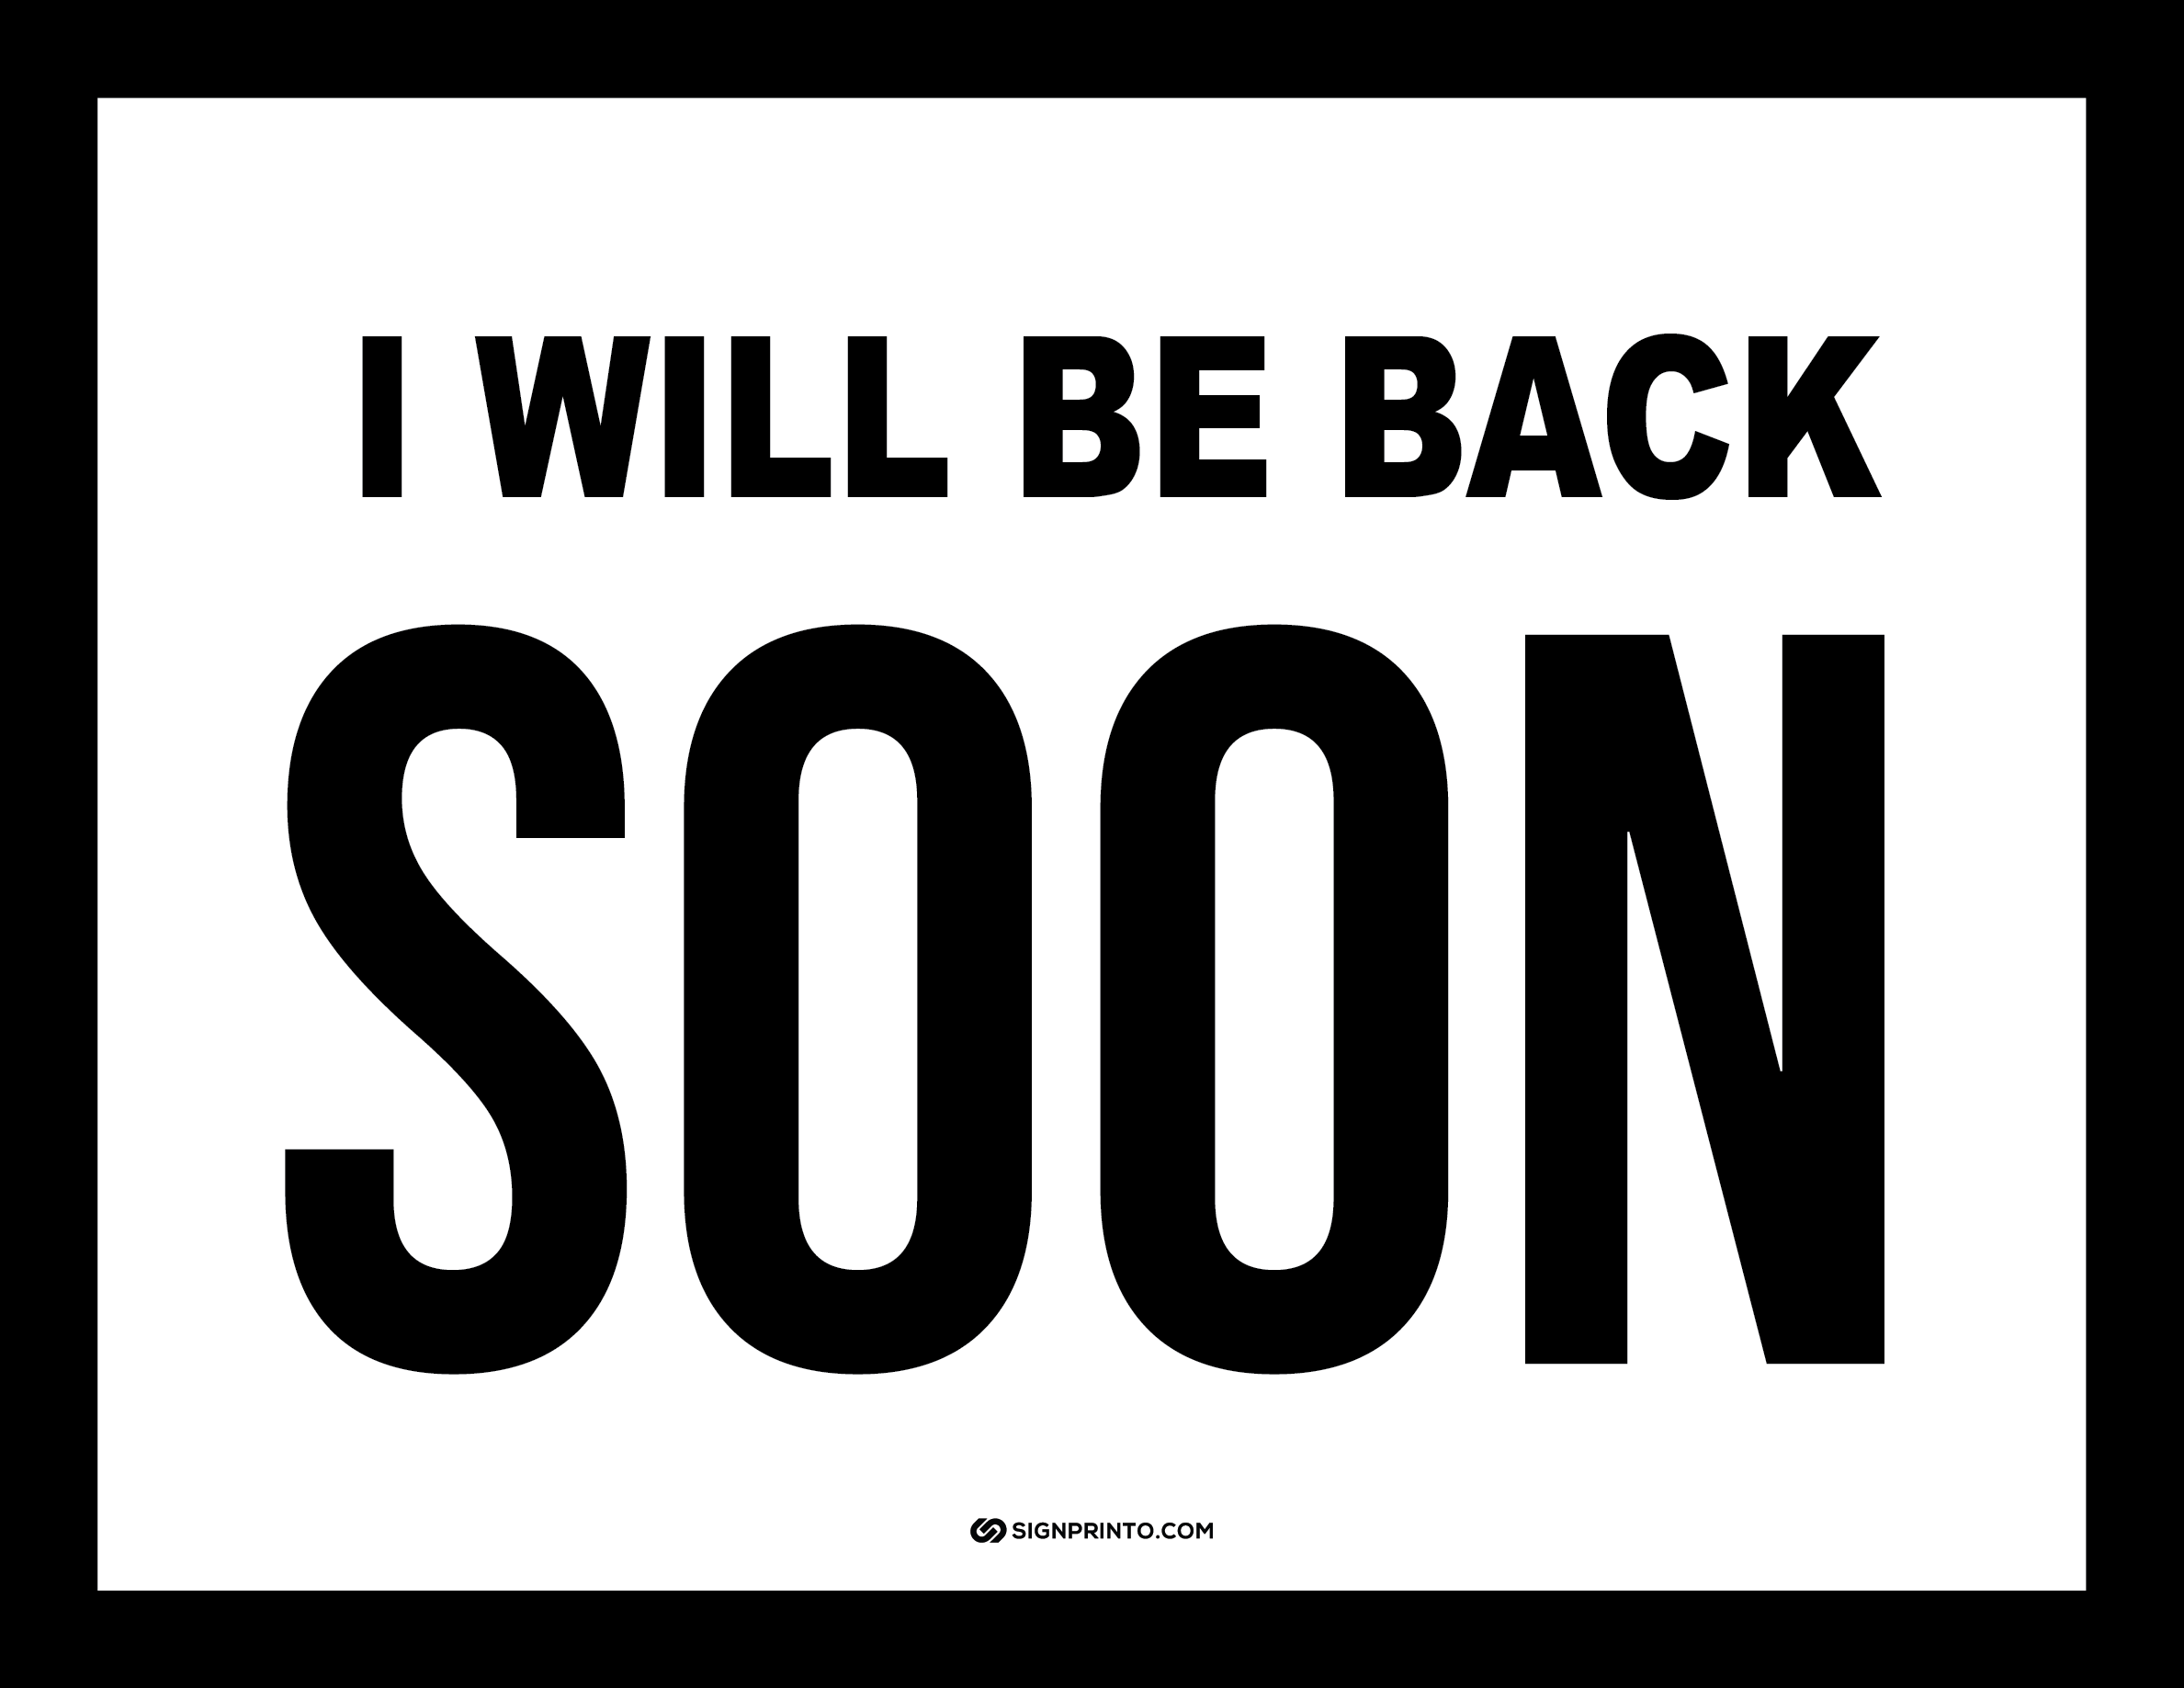 Be Back Soon Sign A4 size Preview